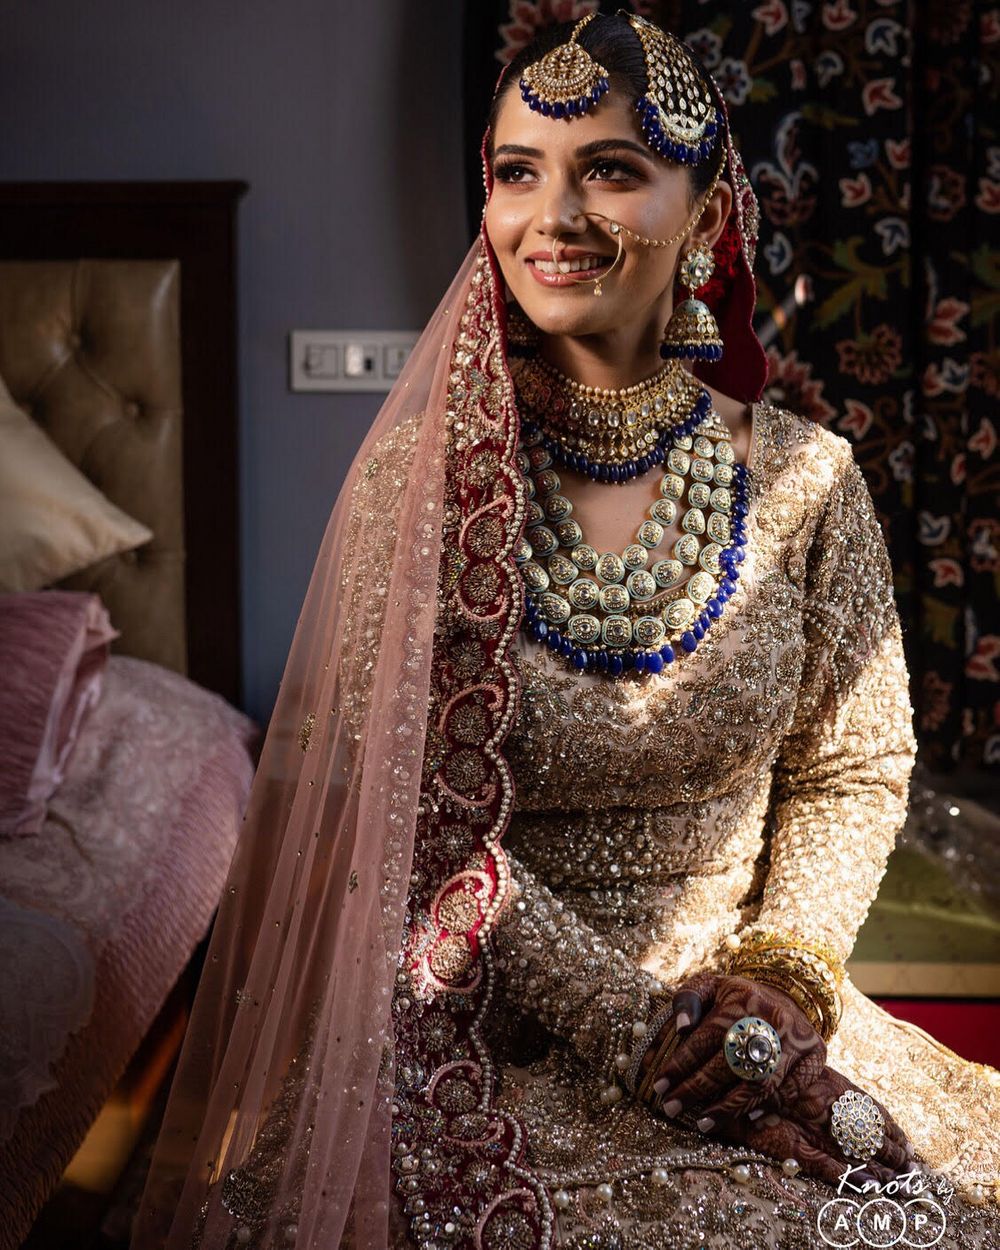 Photo of Gorgeous bridal portrait with the bride wearing a stunning raani haar